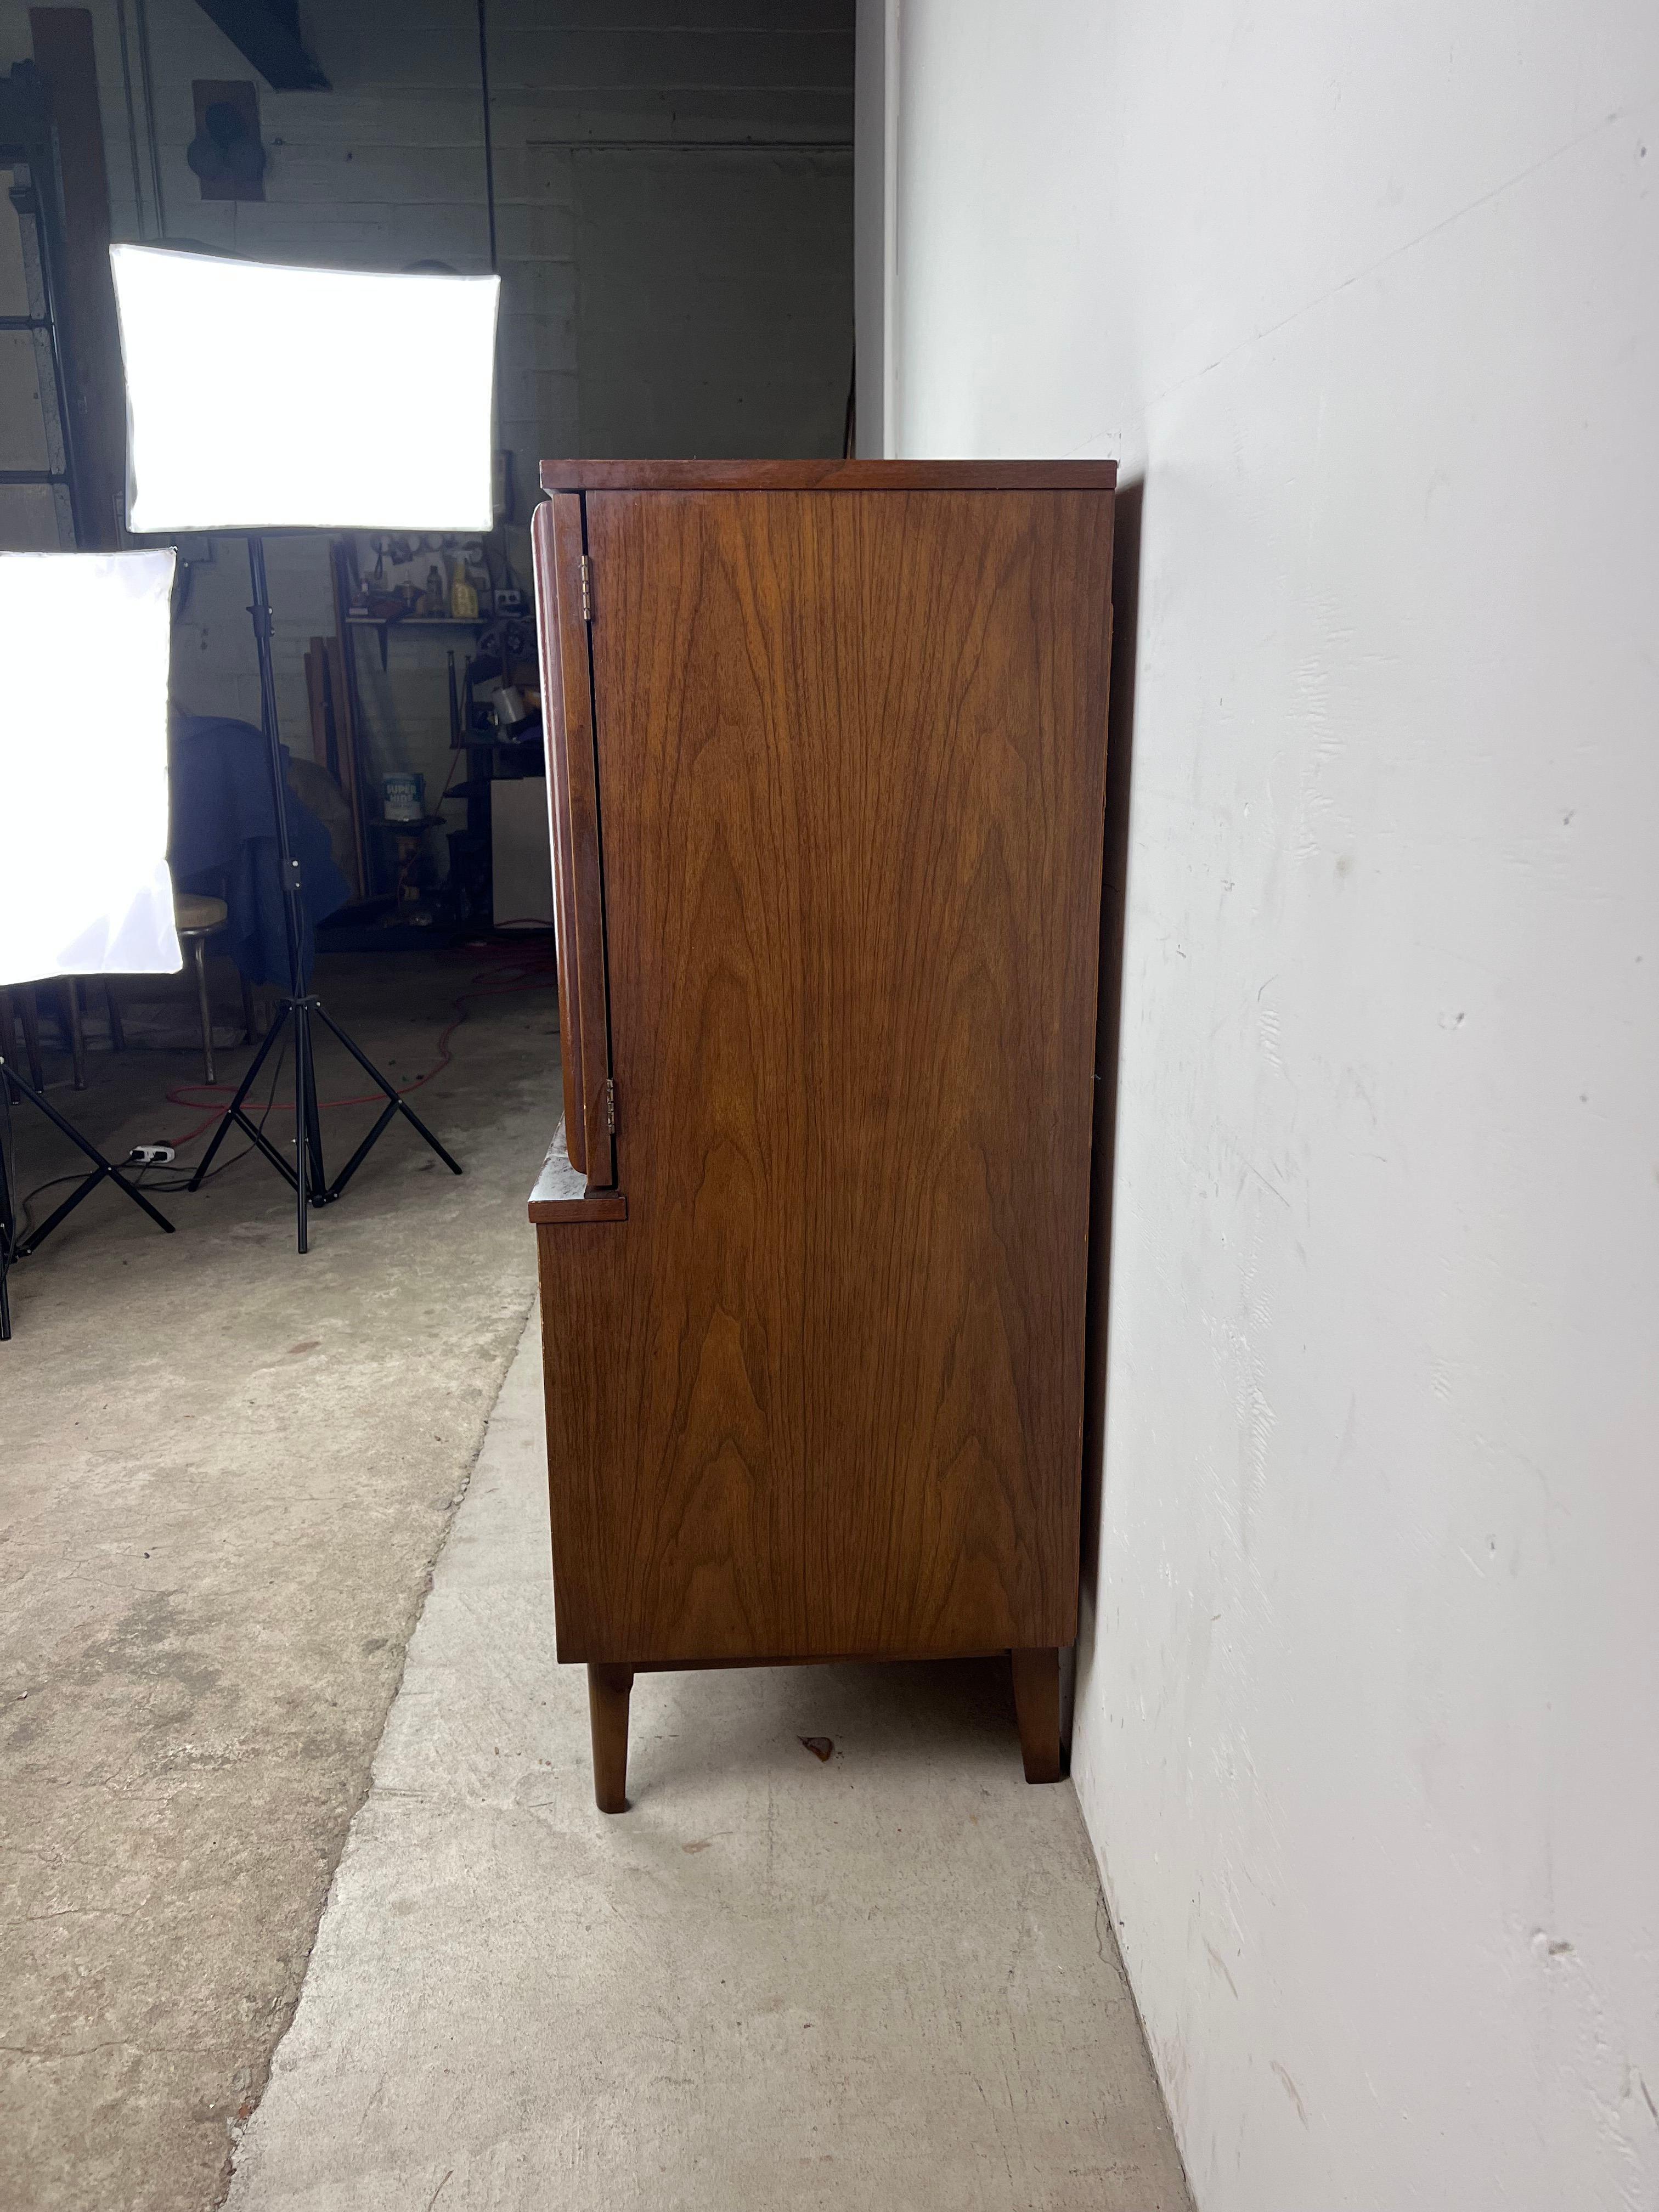 This Mid-Century Modern gentleman's chest features hardwood construction, walnut veneer with original finish, five dovetailed drawers with brass accented hardware, two cabinet doors with sculpted wood pulls, and tall tapered legs. ??

Matching